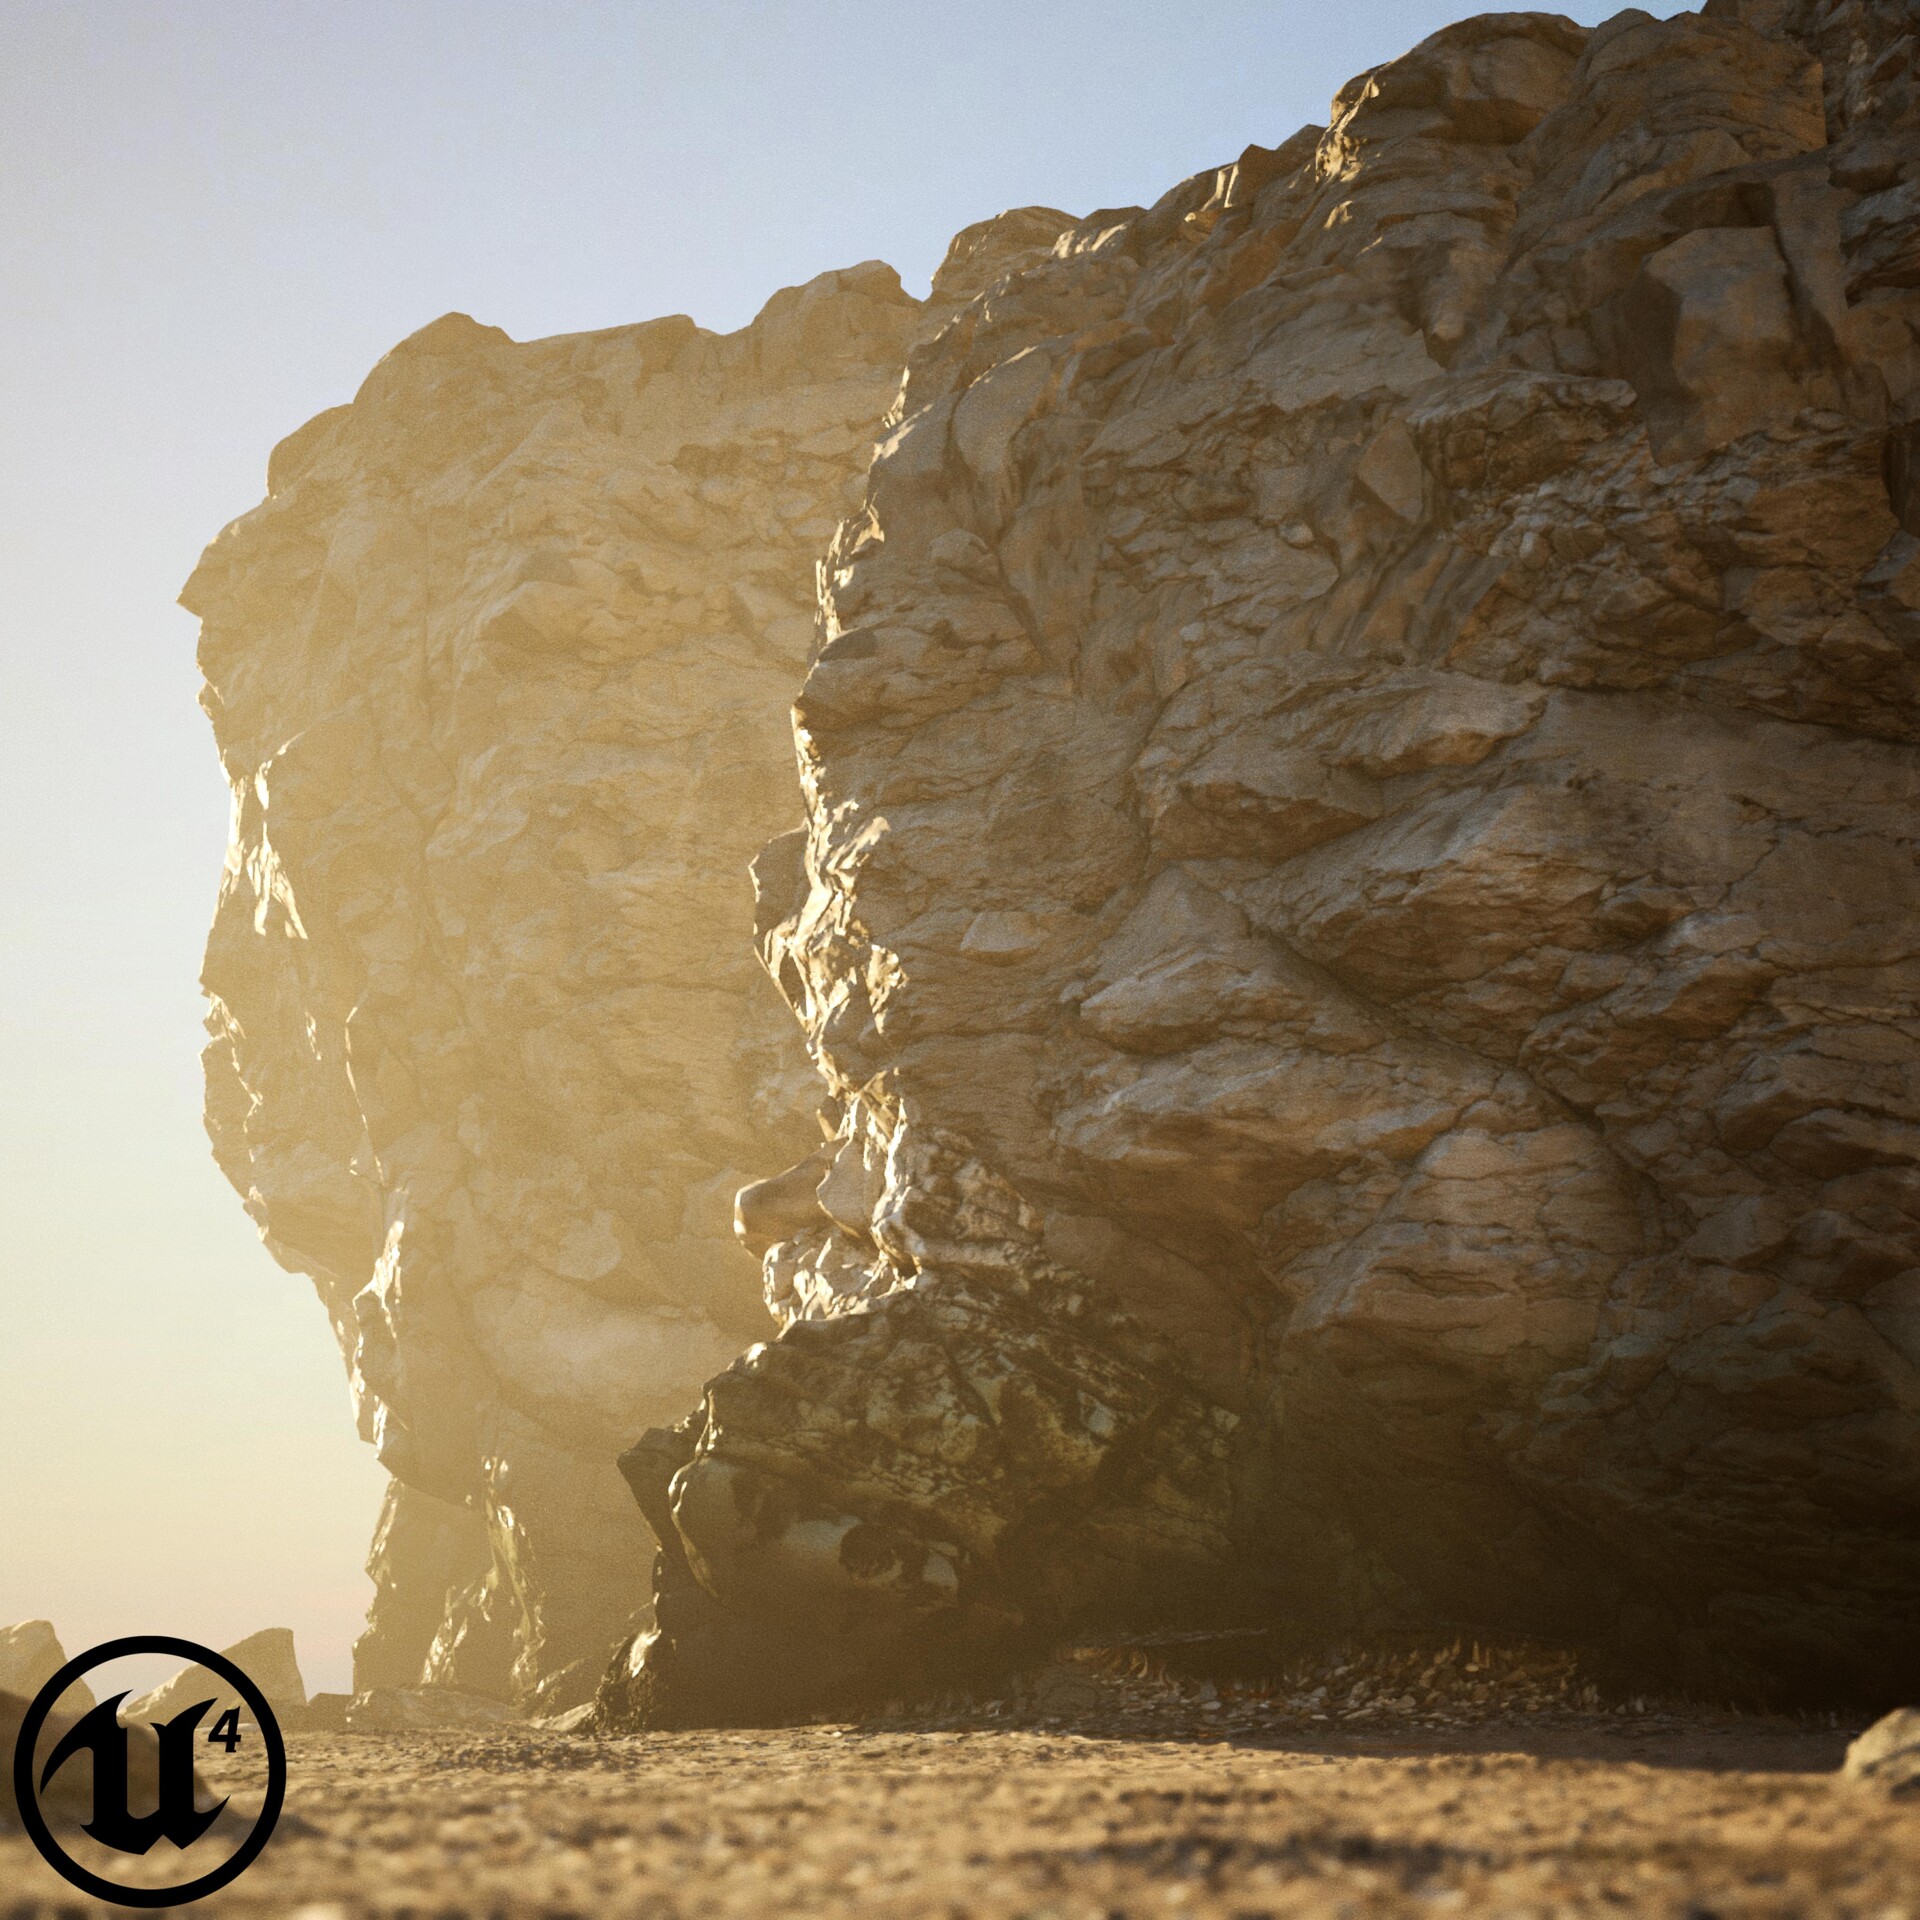 Sunset by the Beach - Unreal Engine 4